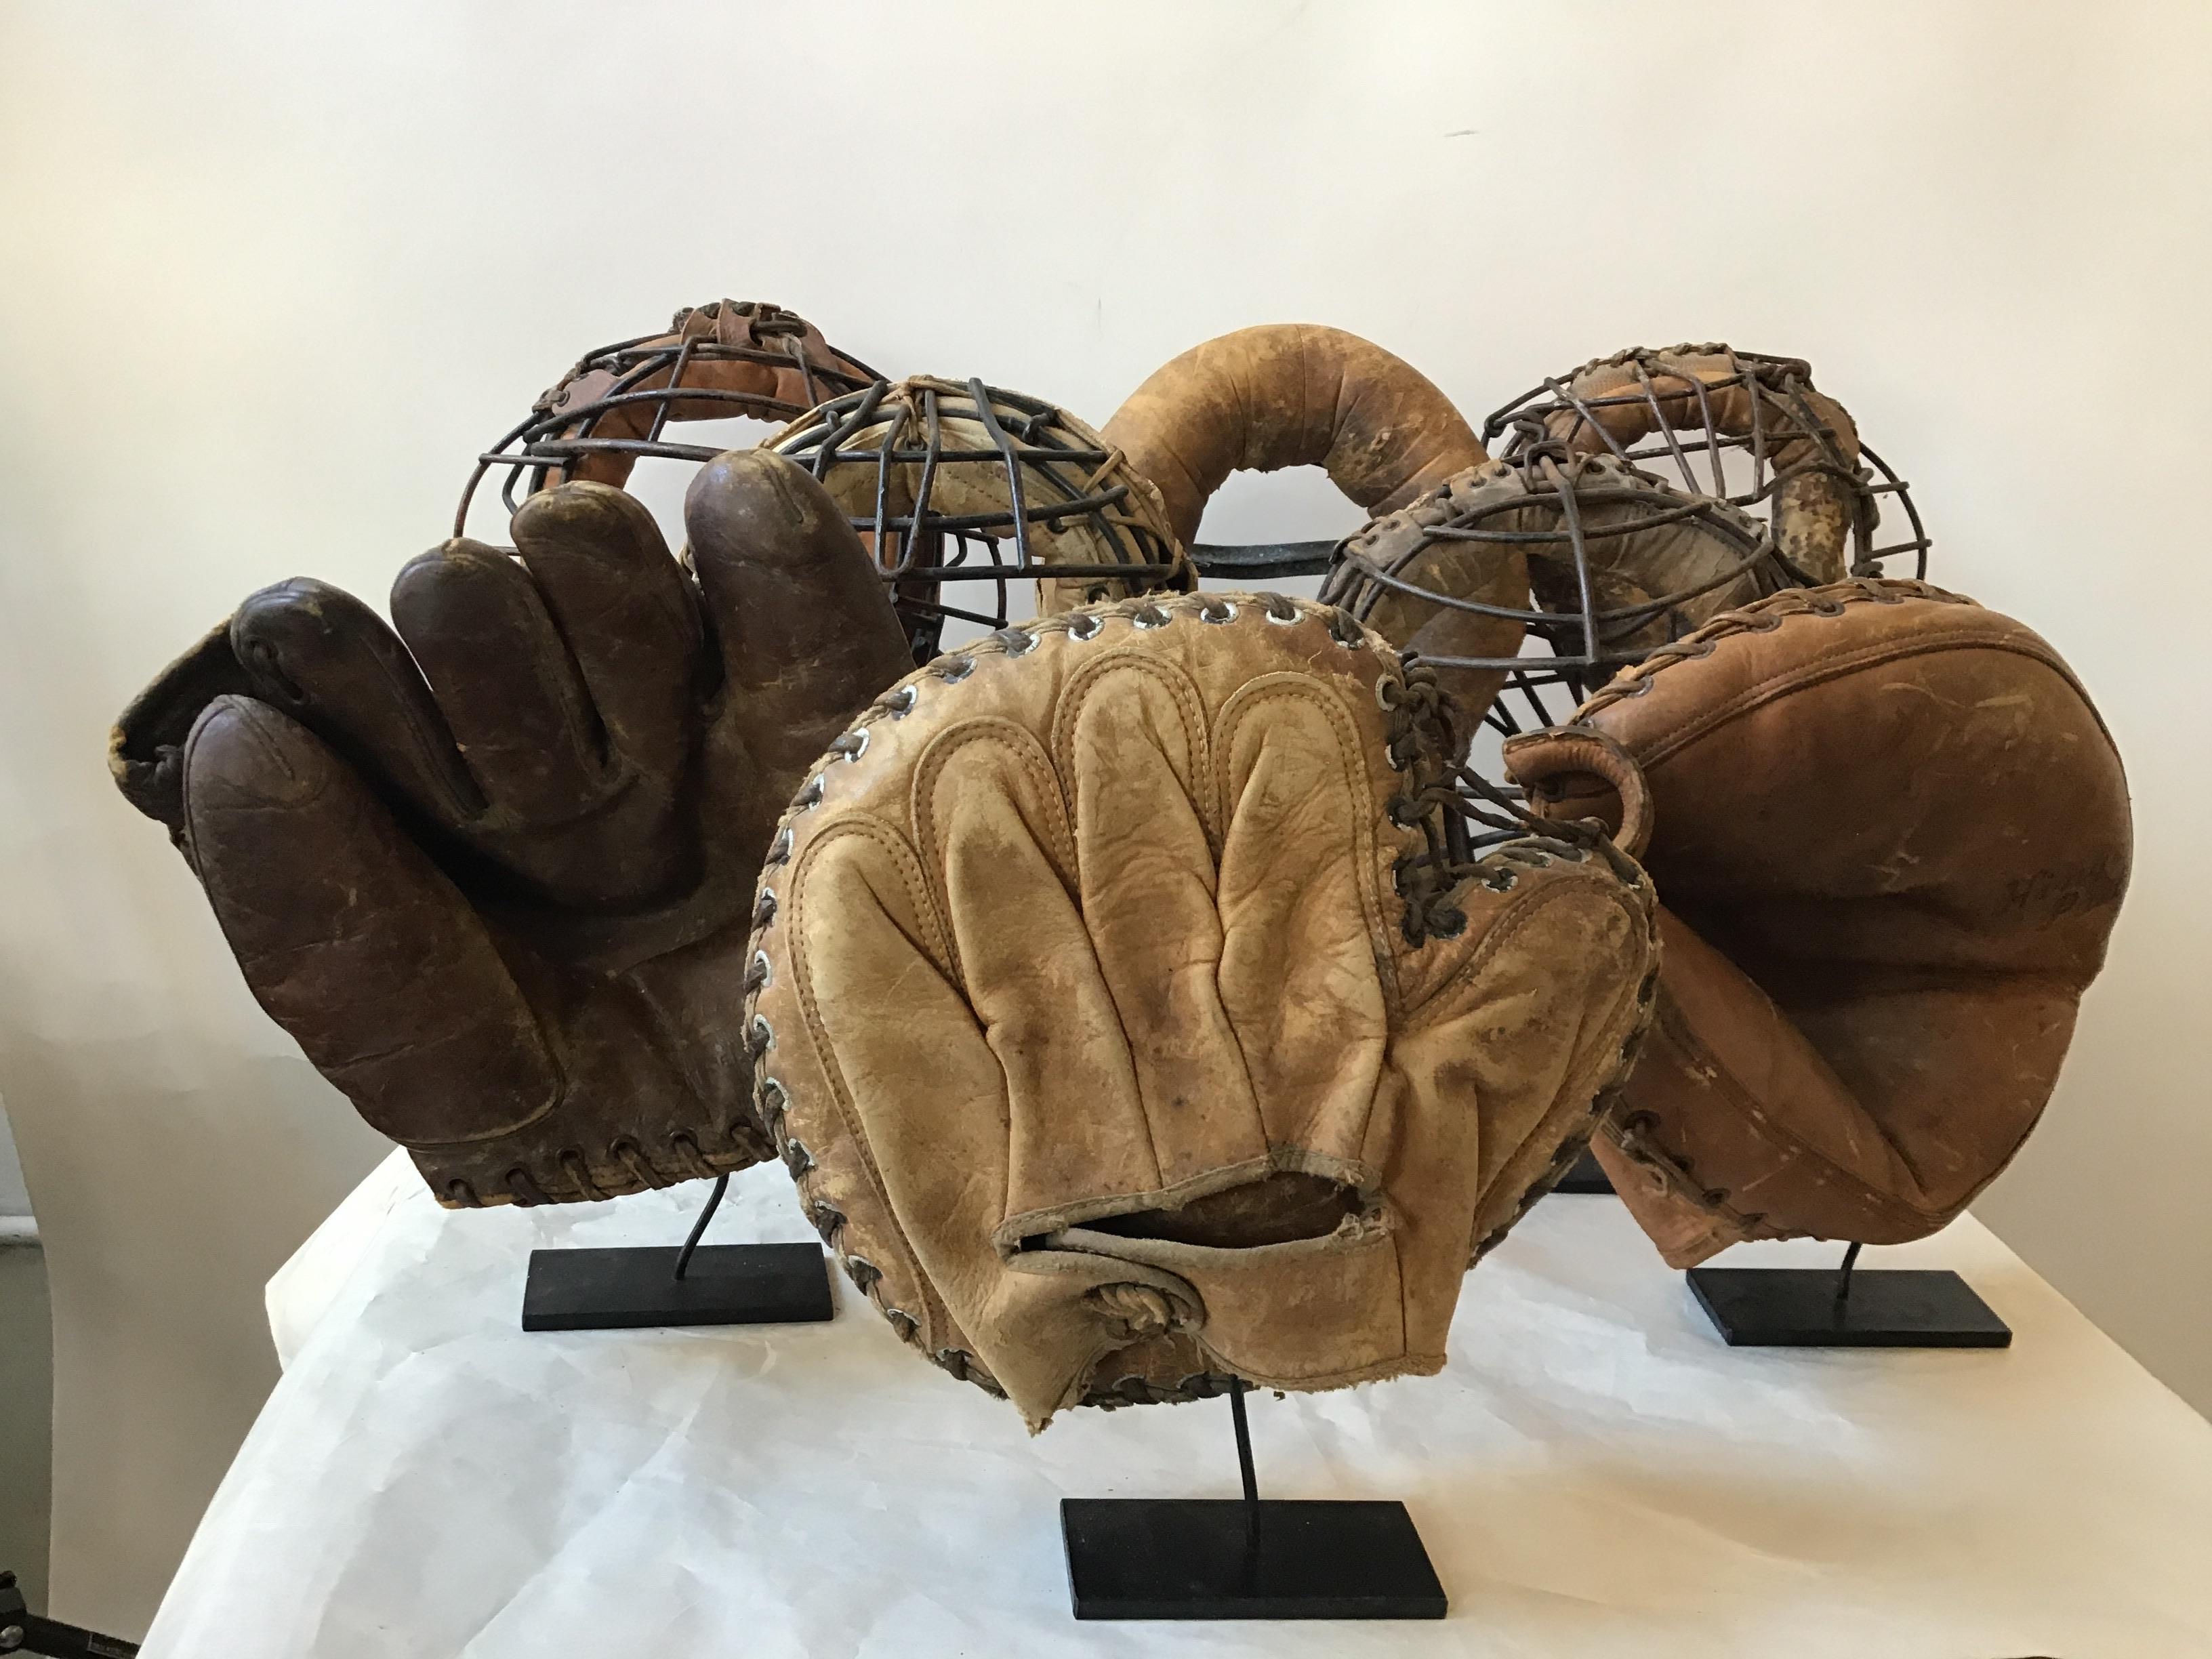 Collection of 8 1940s baseball gloves and catchers masks. Custom iron stands made for each one. Out of a EastHampton, NY estate.